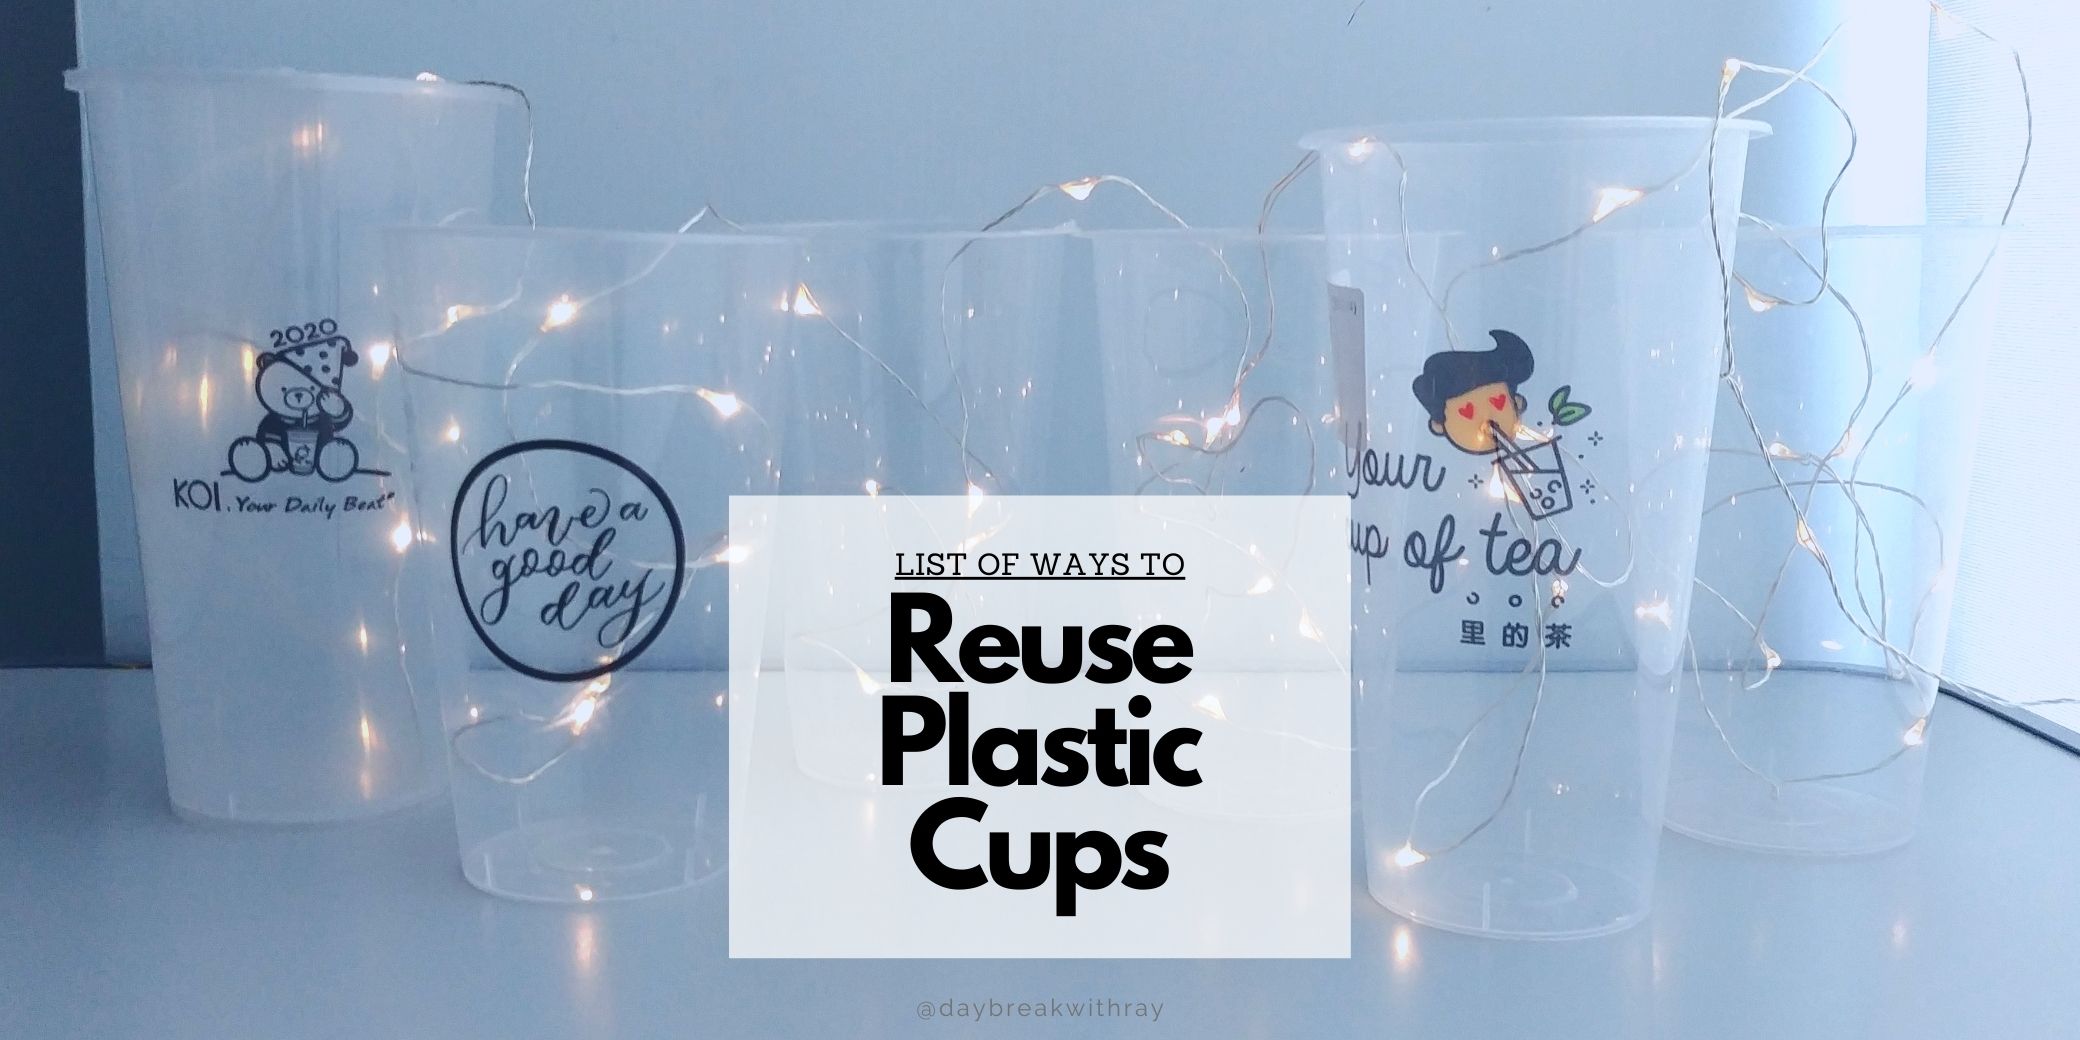 (Featured Image) Ways to Reuse Plastic Cups from Bubble Tea